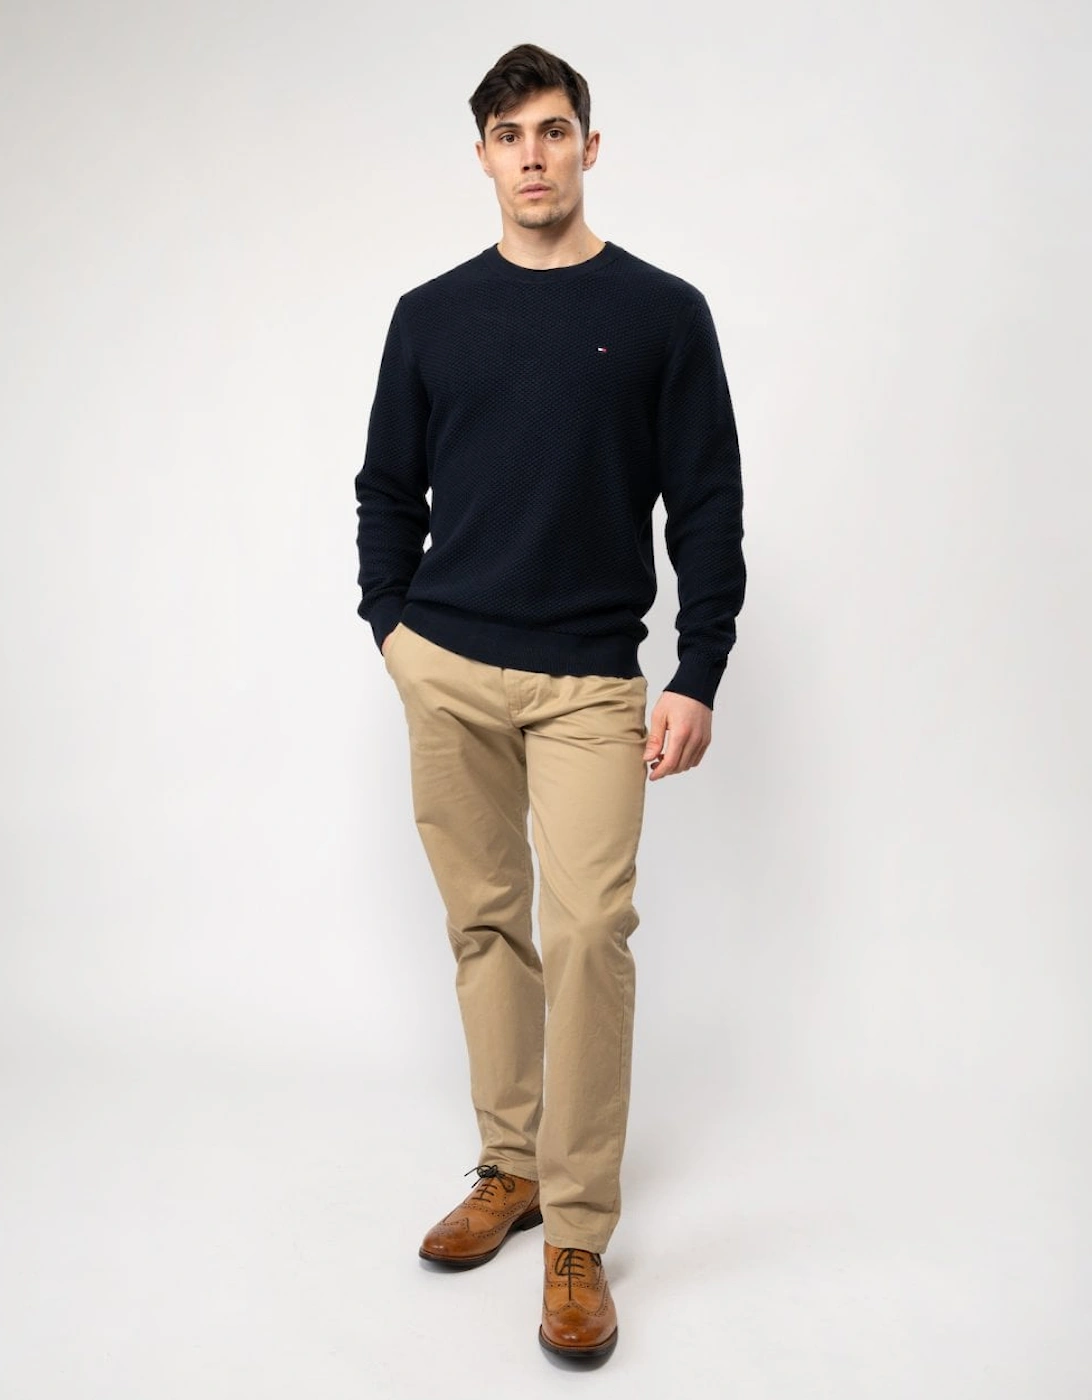 Oval Structure Mens Crew Jumper